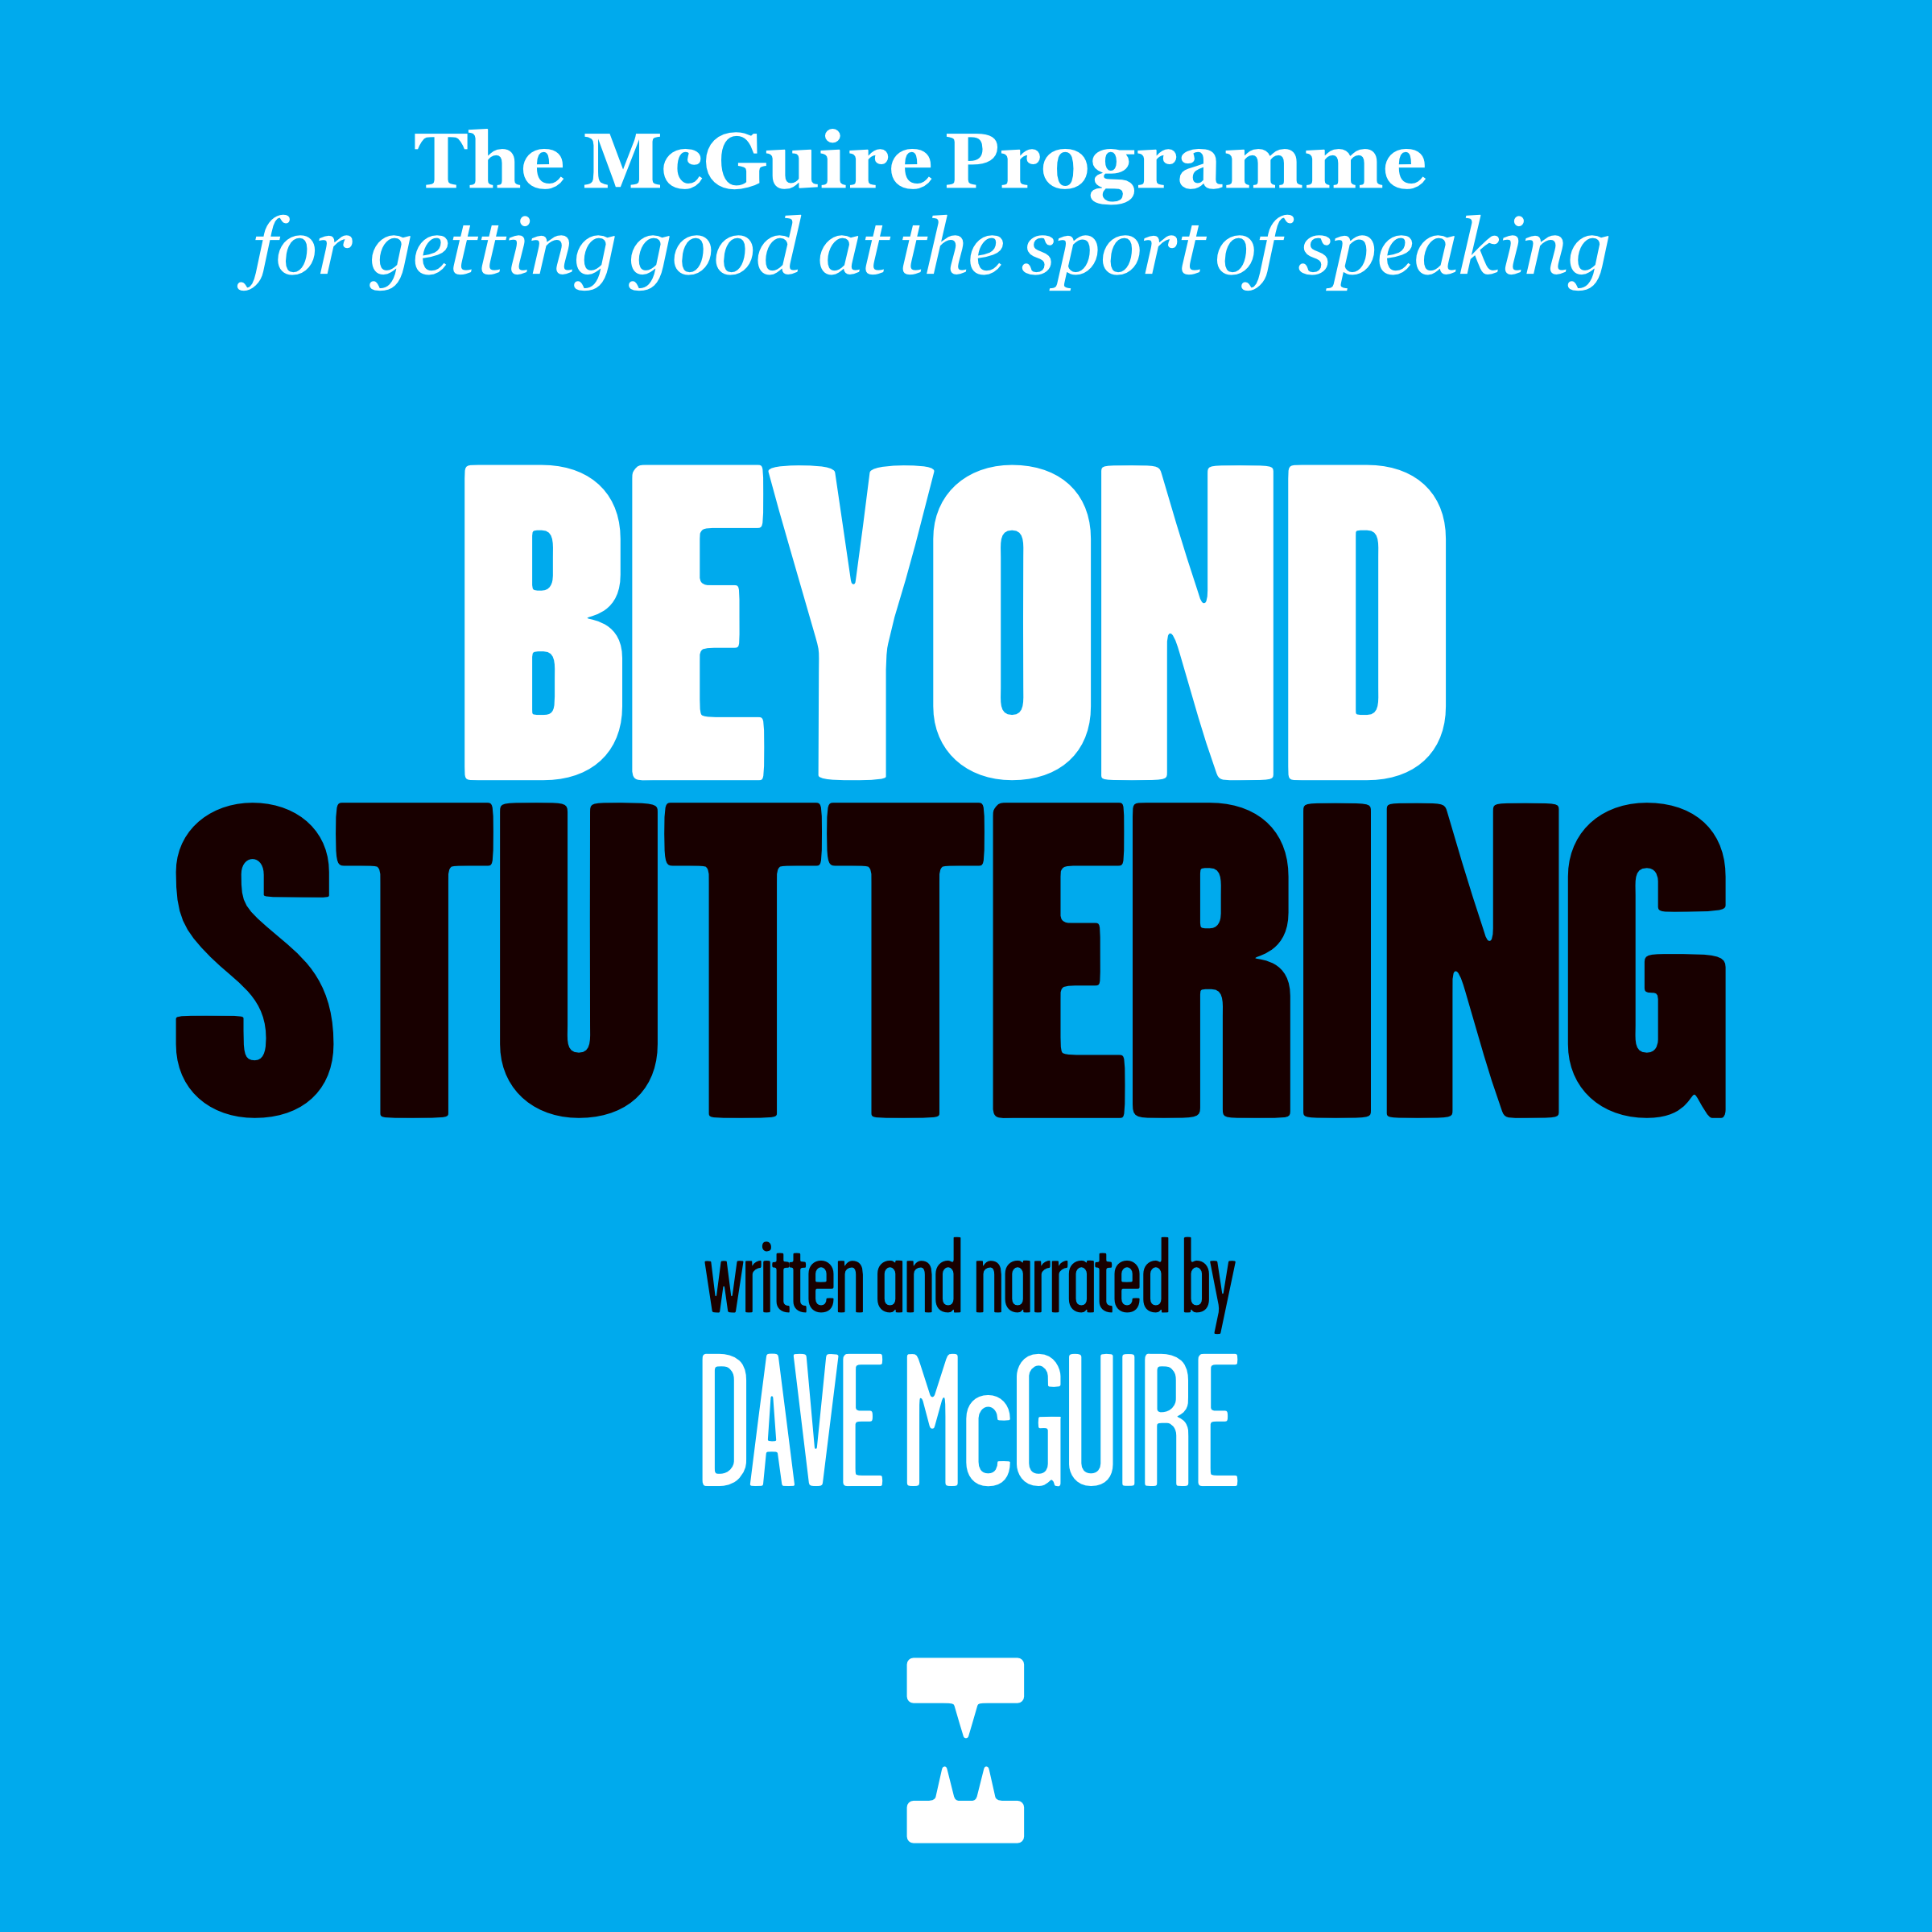 For the 1st time ‘Beyond Stuttering’ is available as an audiobook – Buy it now!